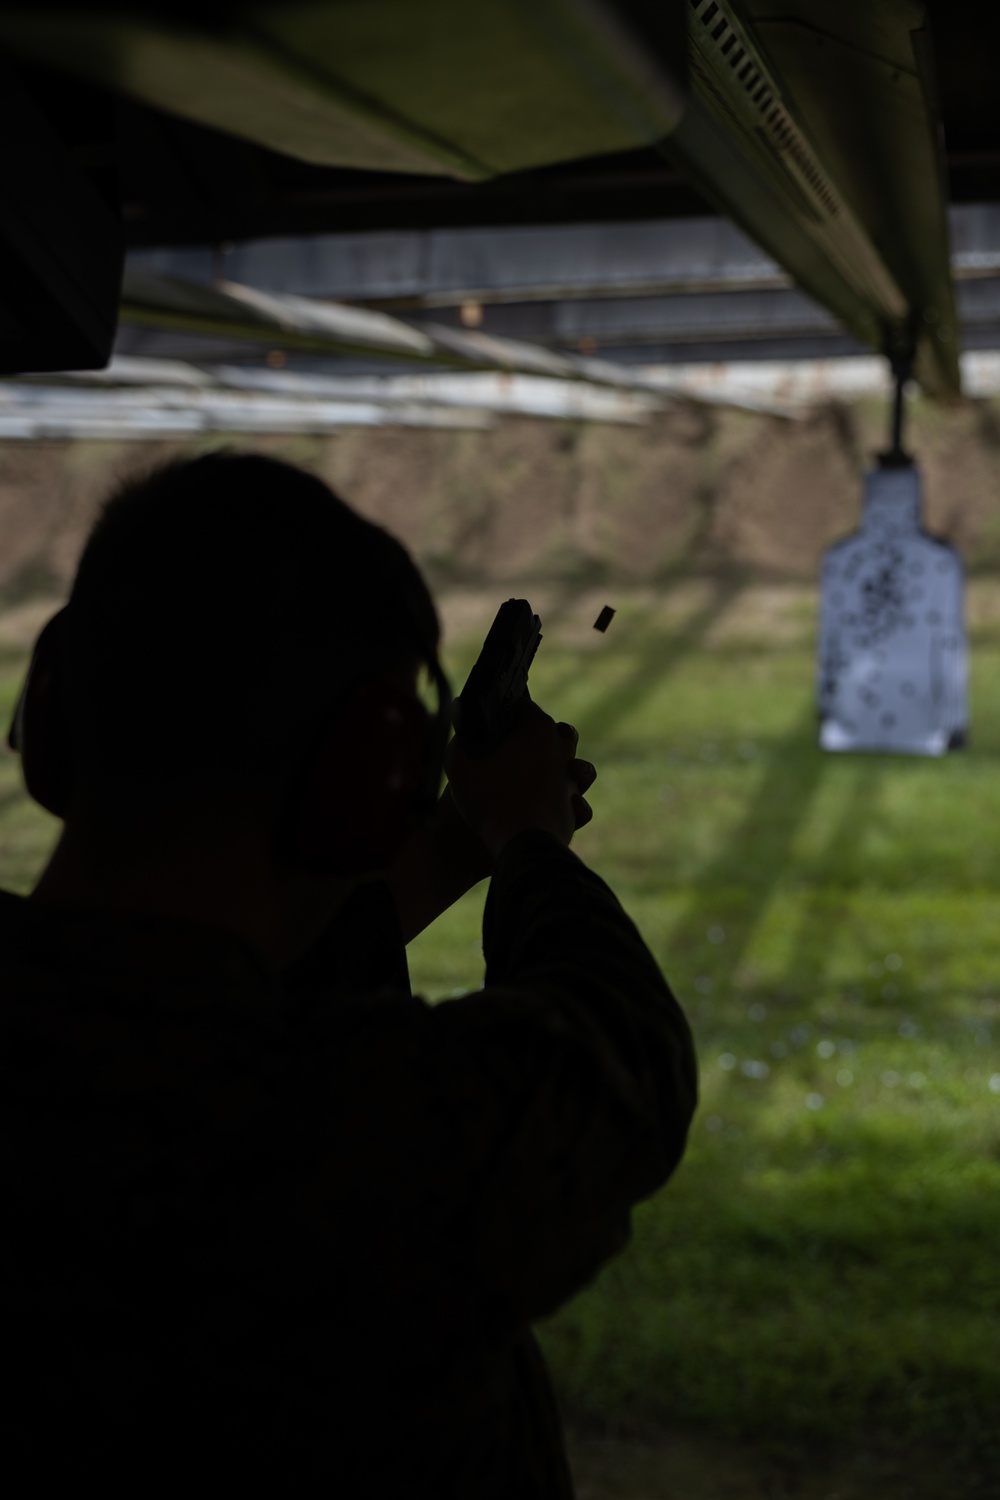 Marines at Marine Corps Air Station Beaufort conduct pistol qualification with the M18 service pistol